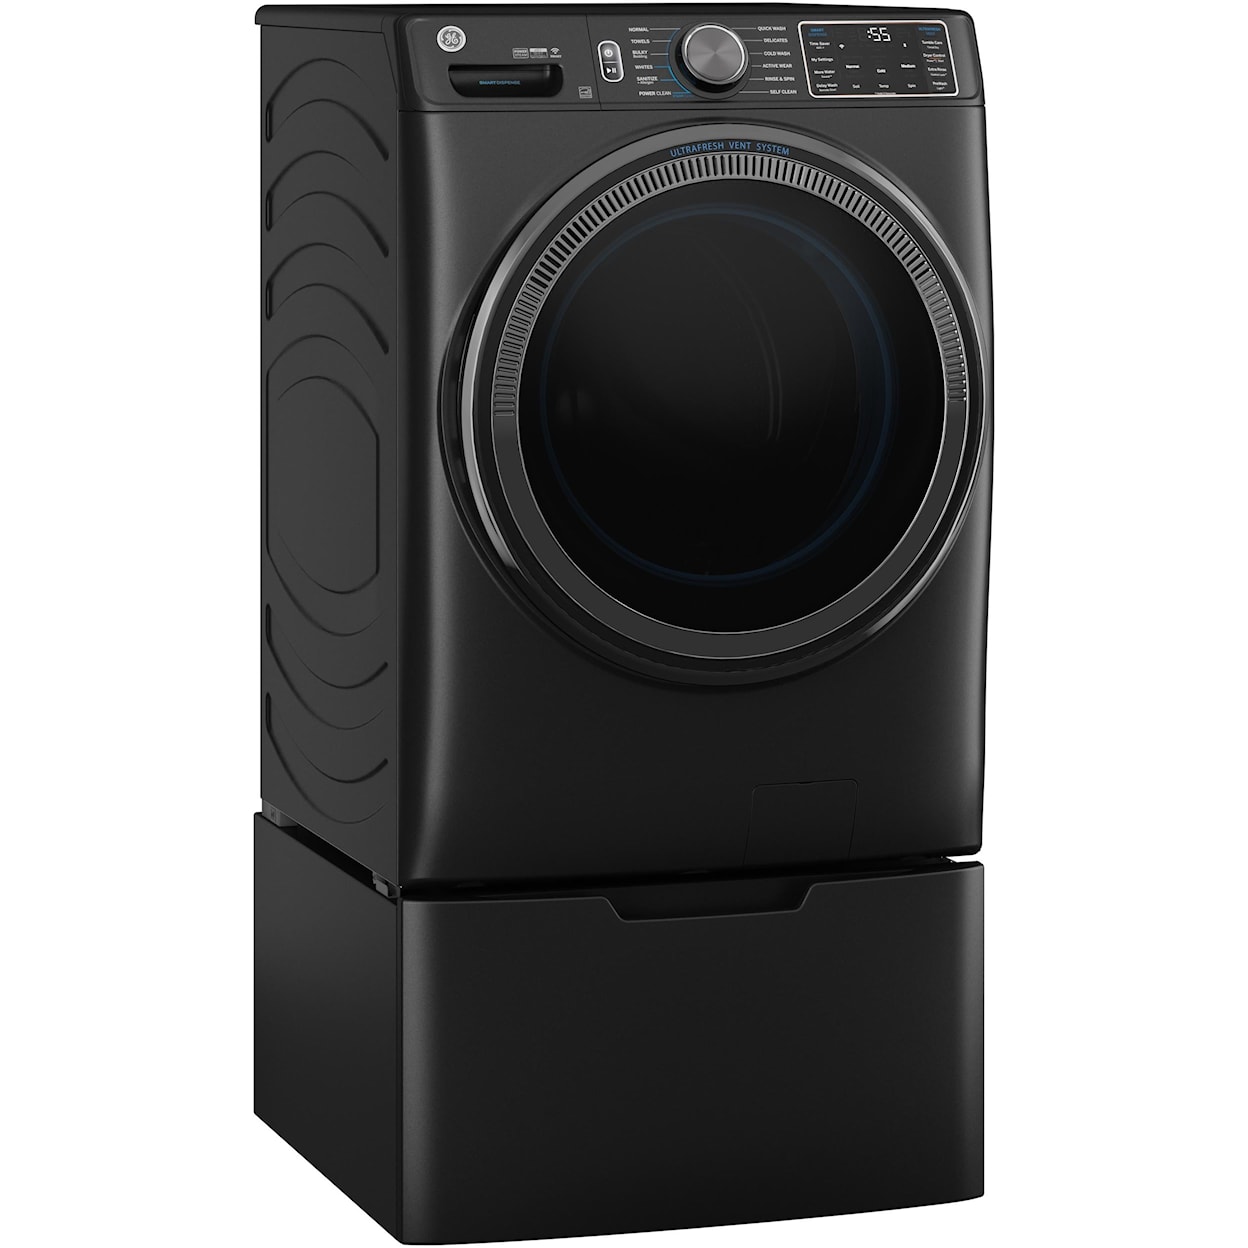 GE Appliances Laundry Front Load Washer